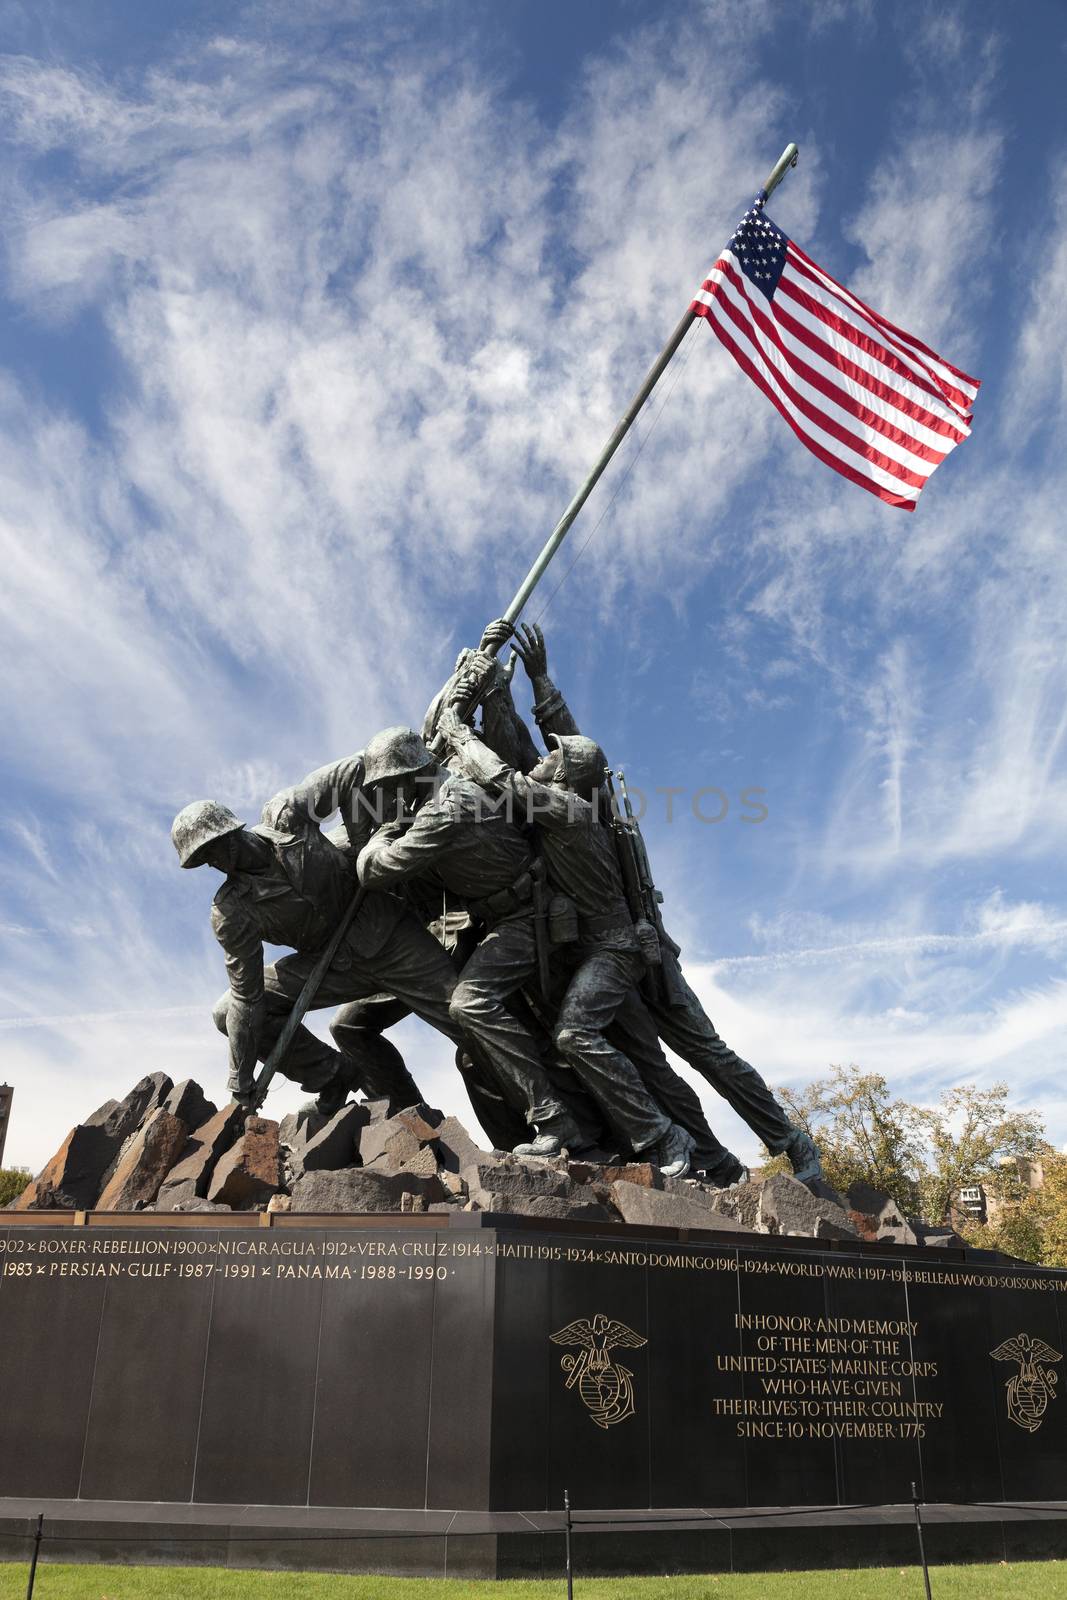 Washington DC, USA - October 20, 2014: Iwo Jima statue at Arlington National Cementery in Washington DC. The statue honors the Marines who have died defending the United States since 1775.